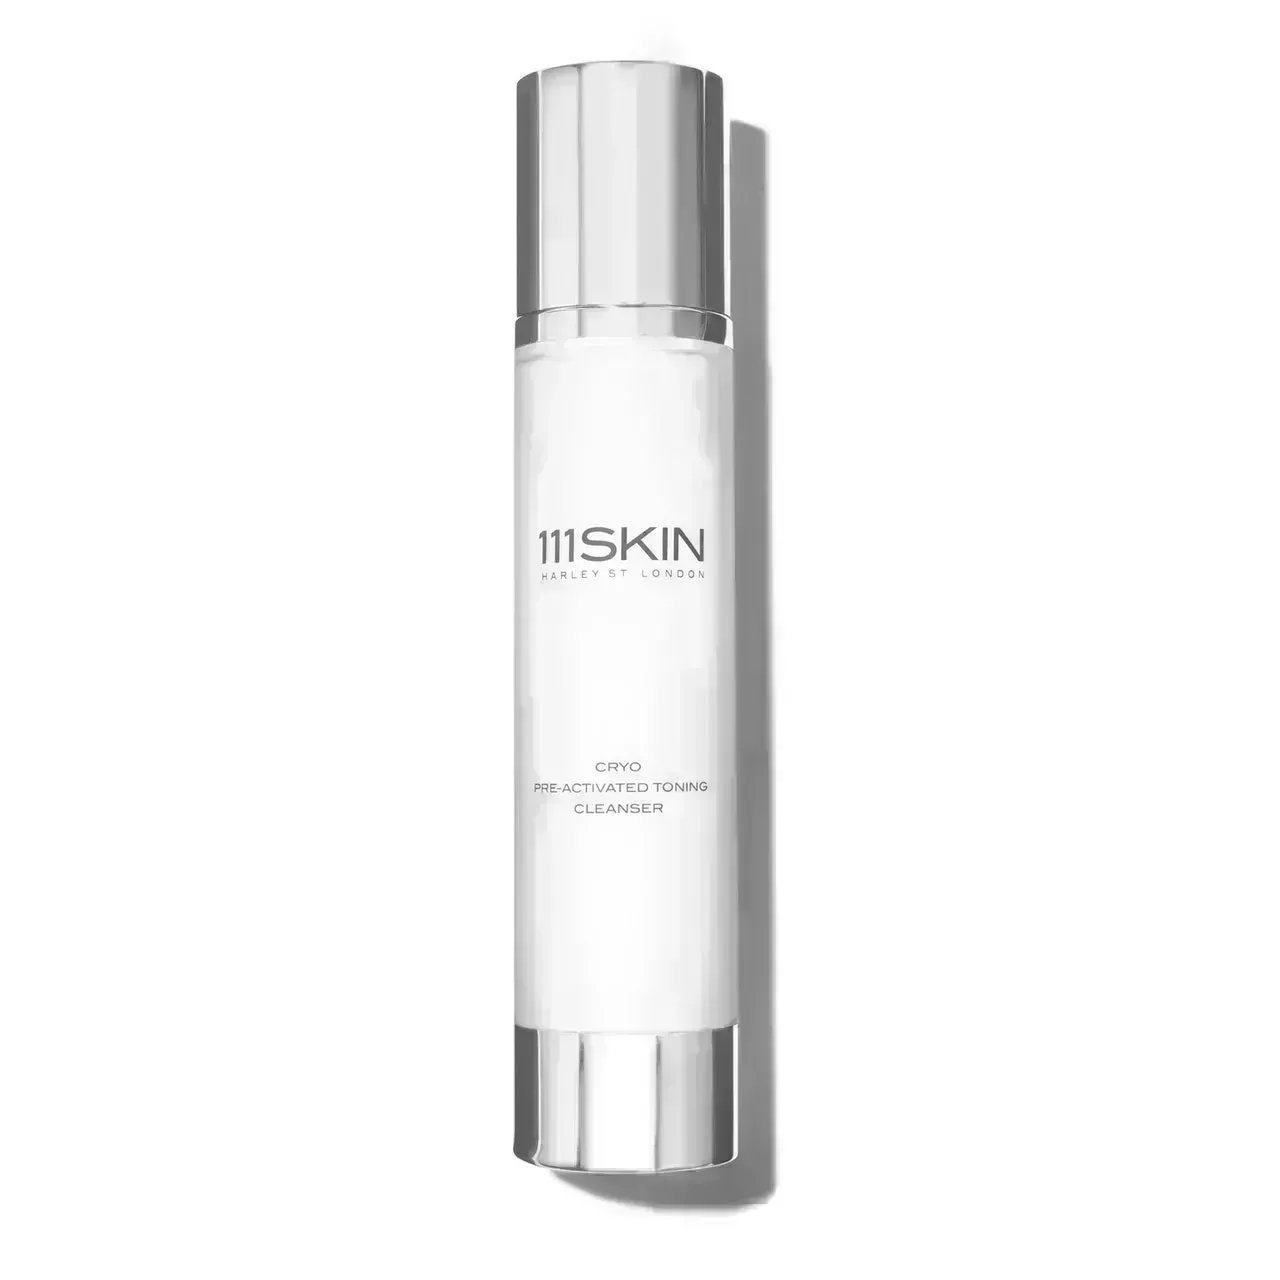 111SKIN Cryo Pre-Activated Toning Cleanser on white background